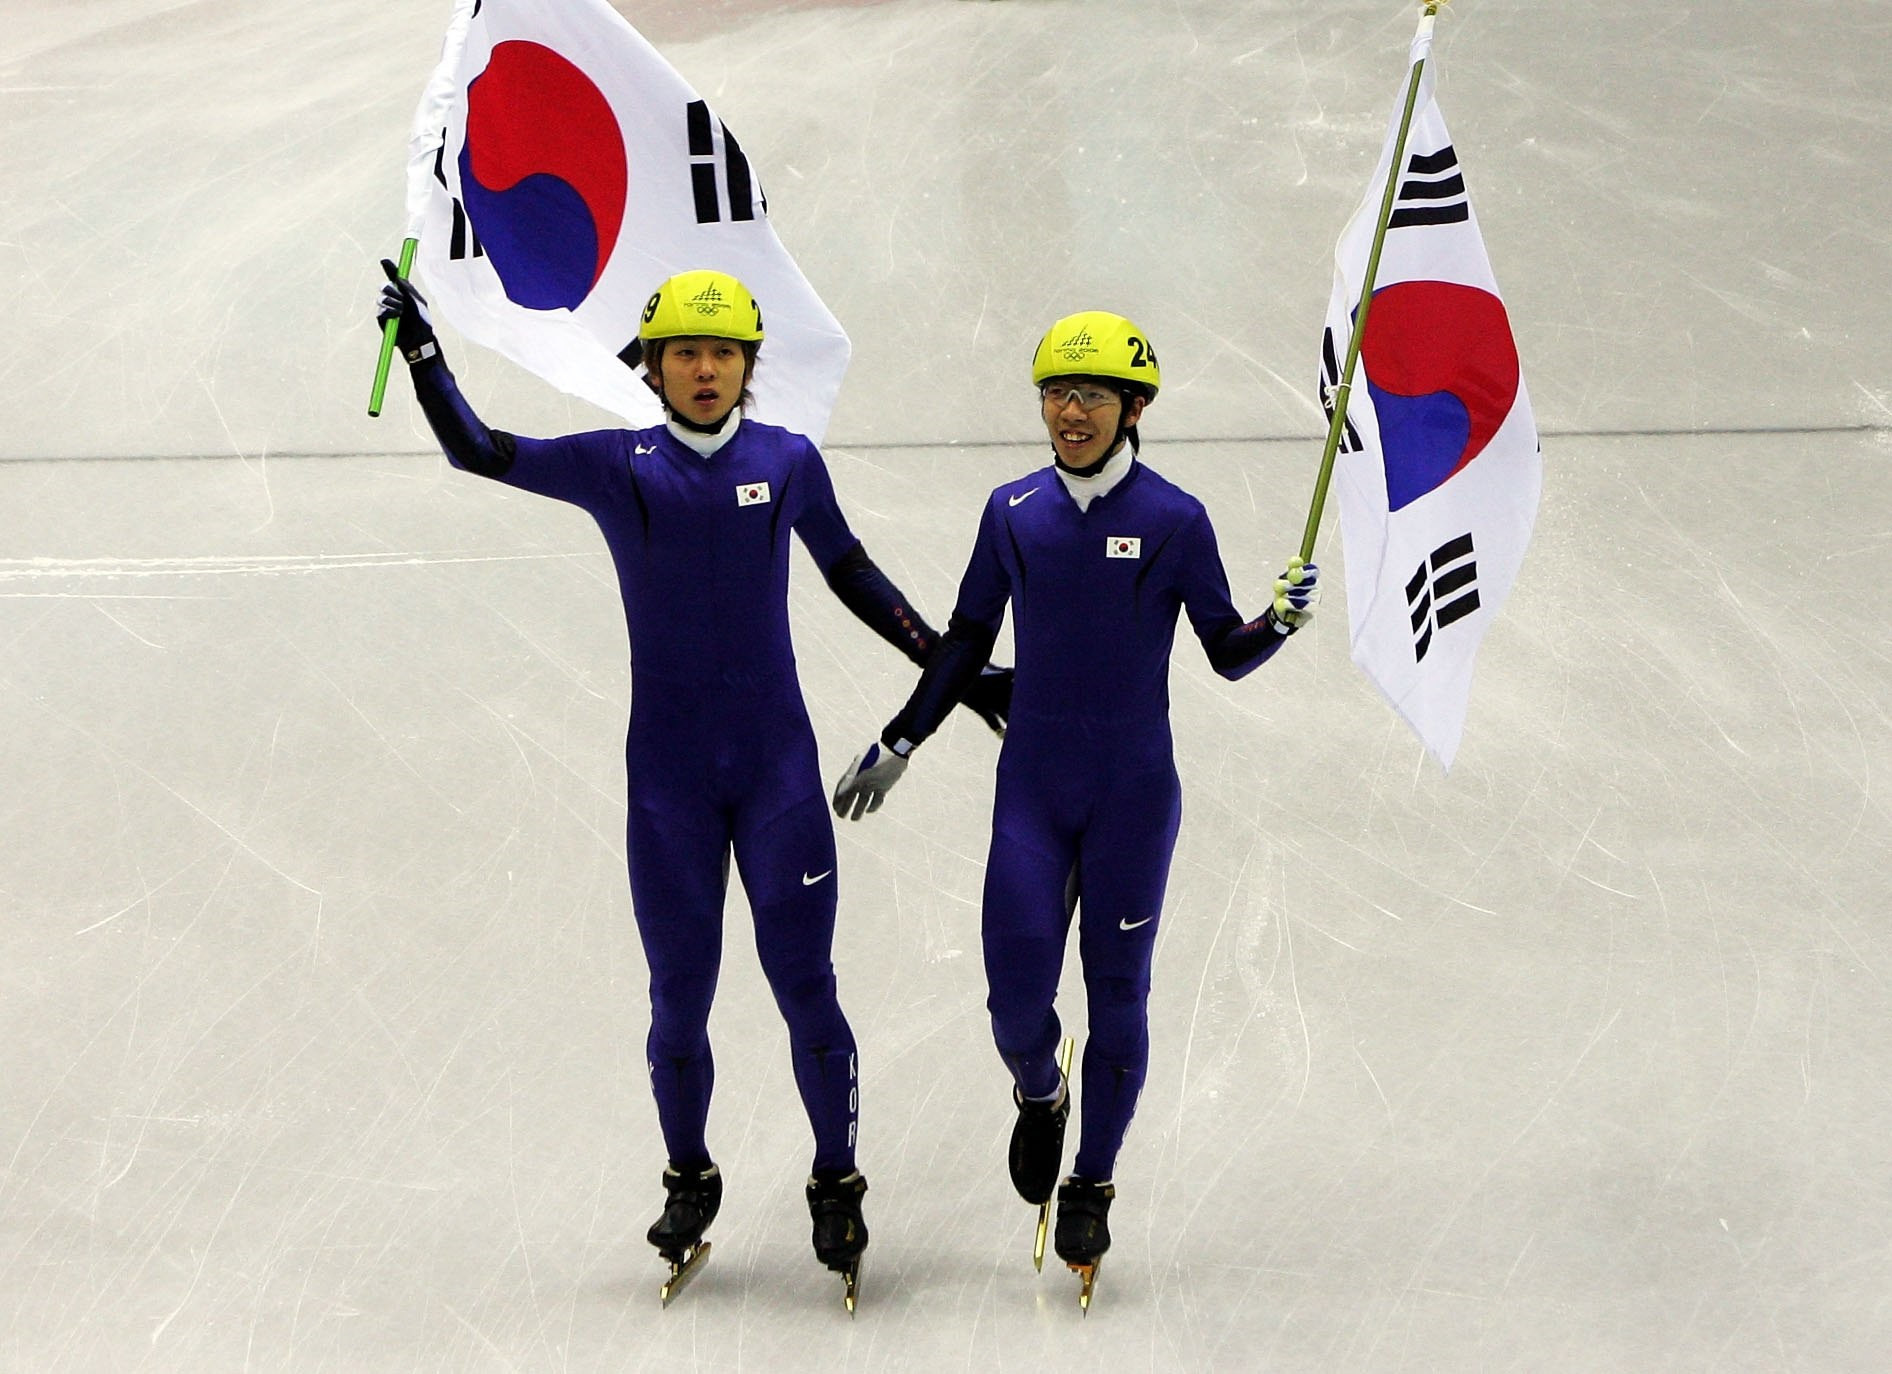 Victor An, left, competed under the name of Hyun-Soo Ahn, when representing South Korea ©Getty Images